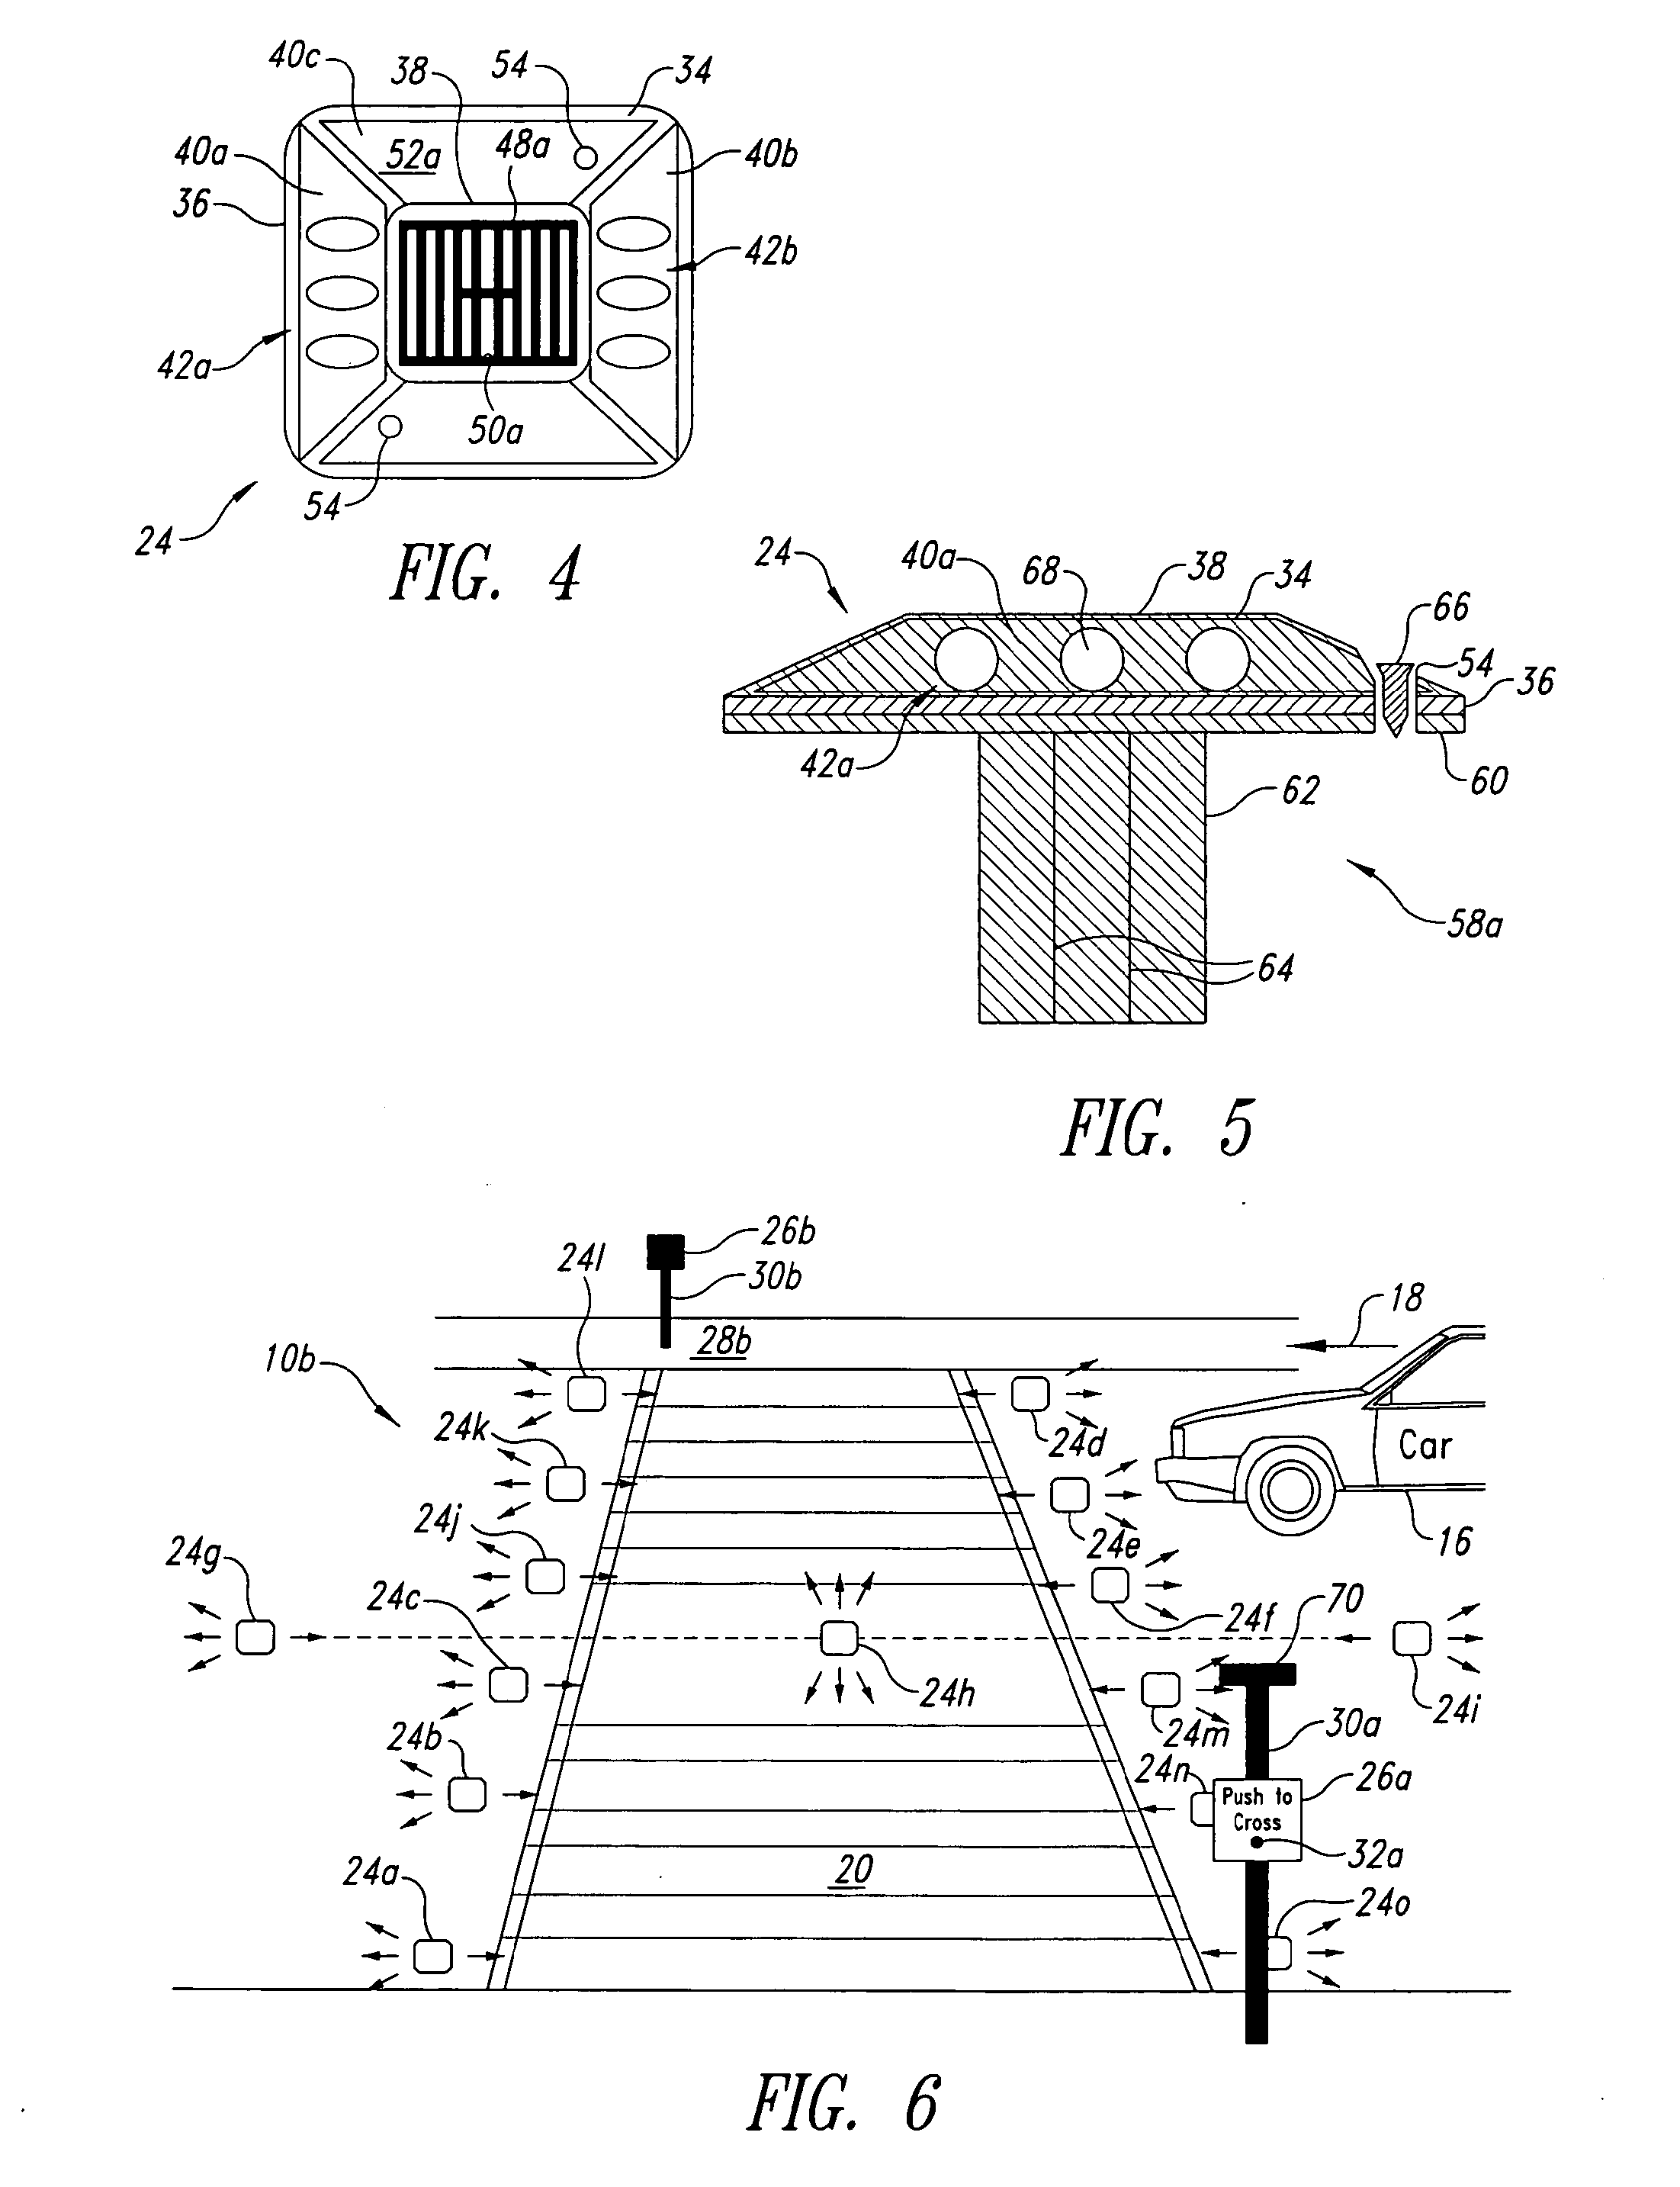 Methods, systems and devices related to road mounted indicators for providing visual indications to approaching traffic